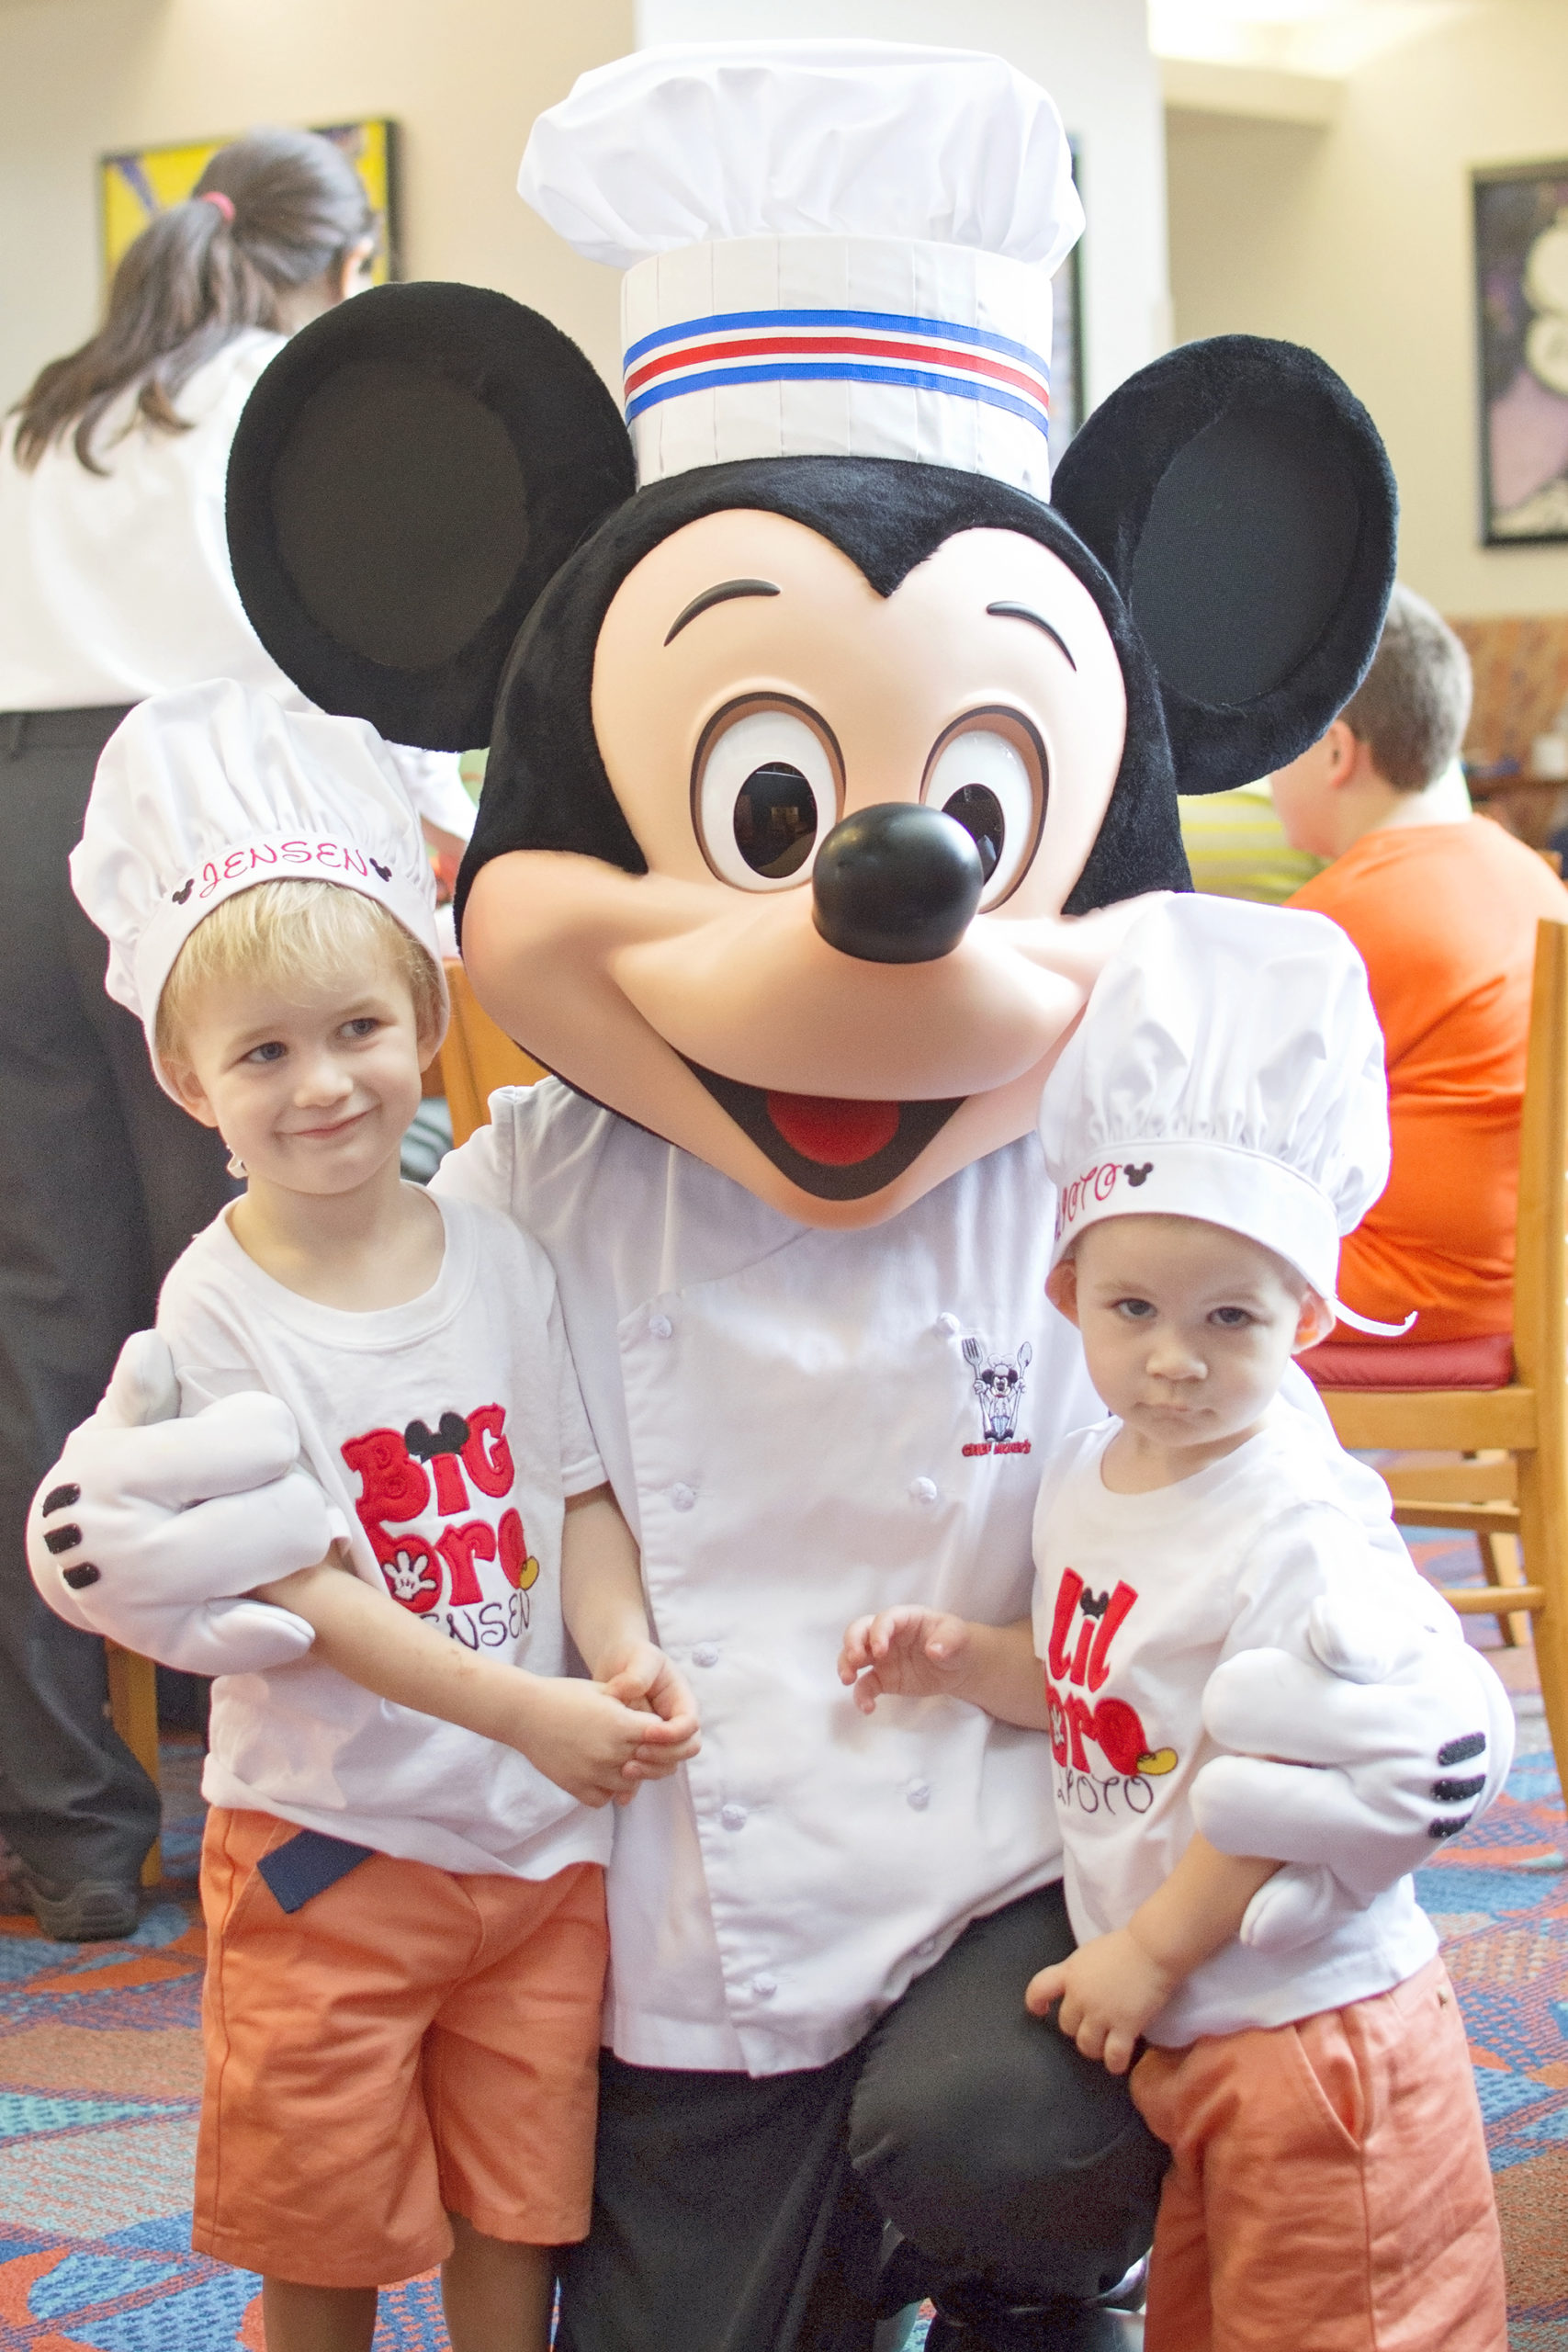 CHEF MICKEY’S – DINE WITH THE FAB FIVE!